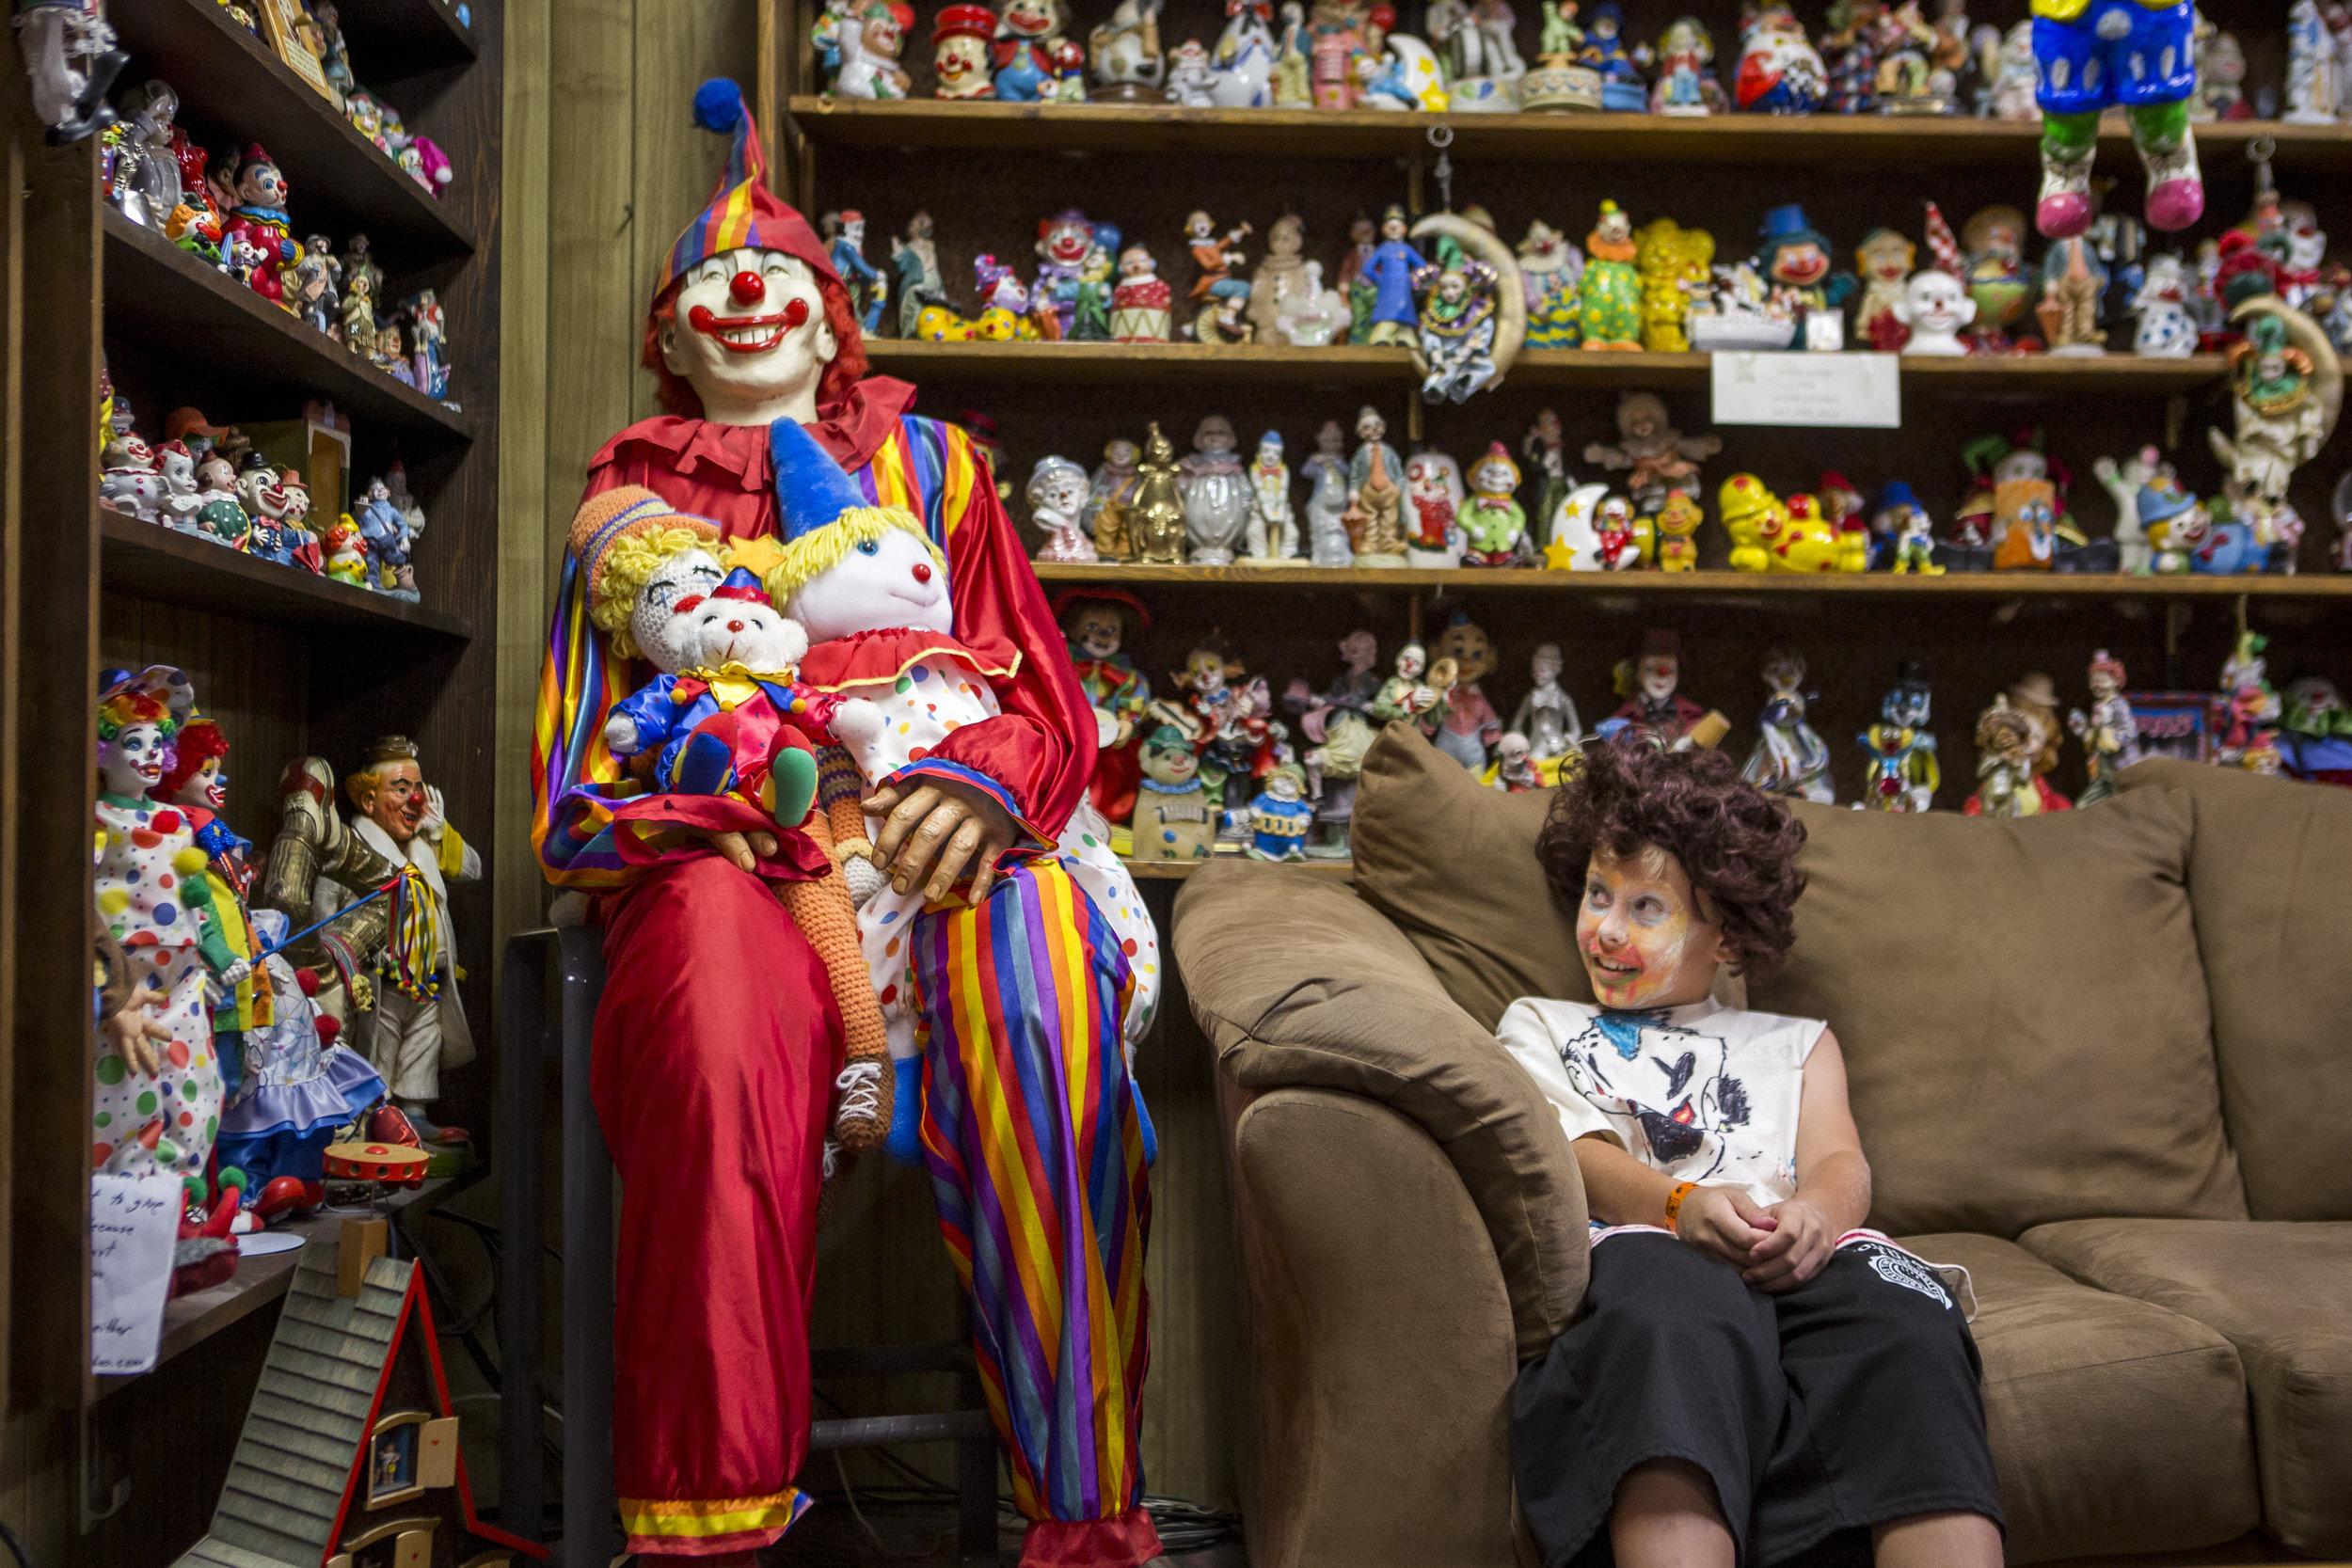  Kai James, 9, glances over at the life-size clown known as "Mr. Creepy" in the lobby of the Clown Motel in Tonopah, Nevada, on Tuesday, July 25, 2017. James came with his brother and mom from Las Vegas to stay for a night and dressed up in clown att